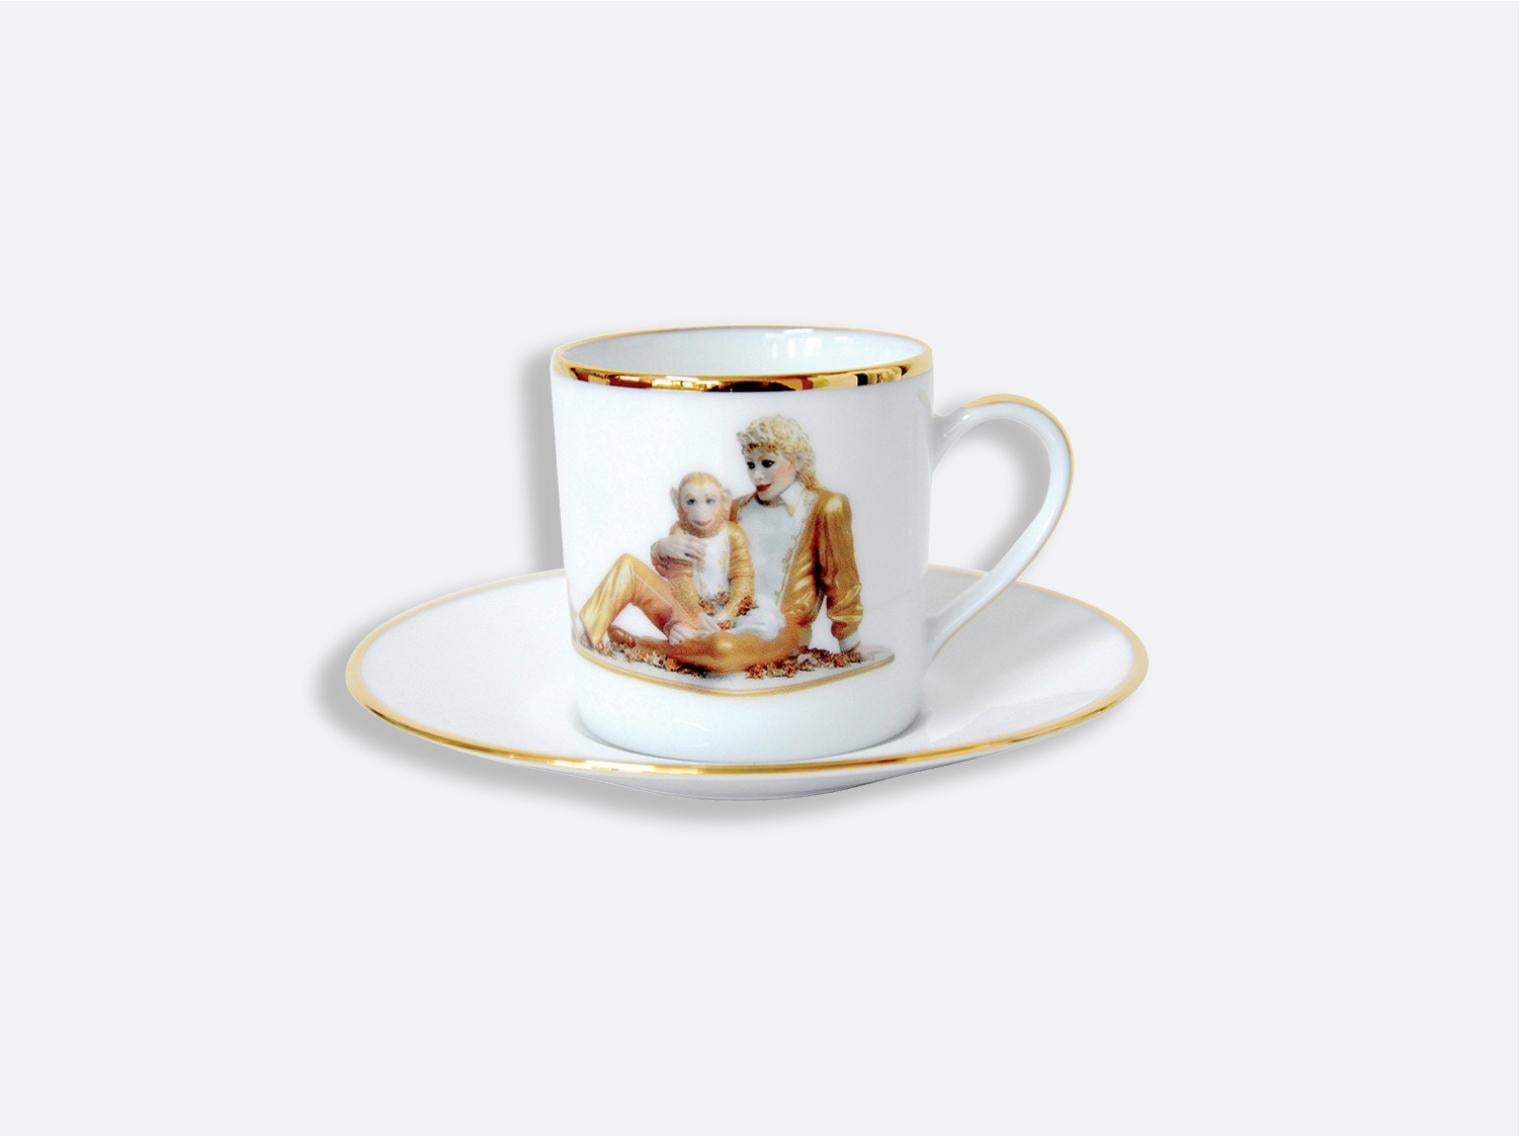 European Banality Series AD Cup and Saucer Set by Jeff Koons